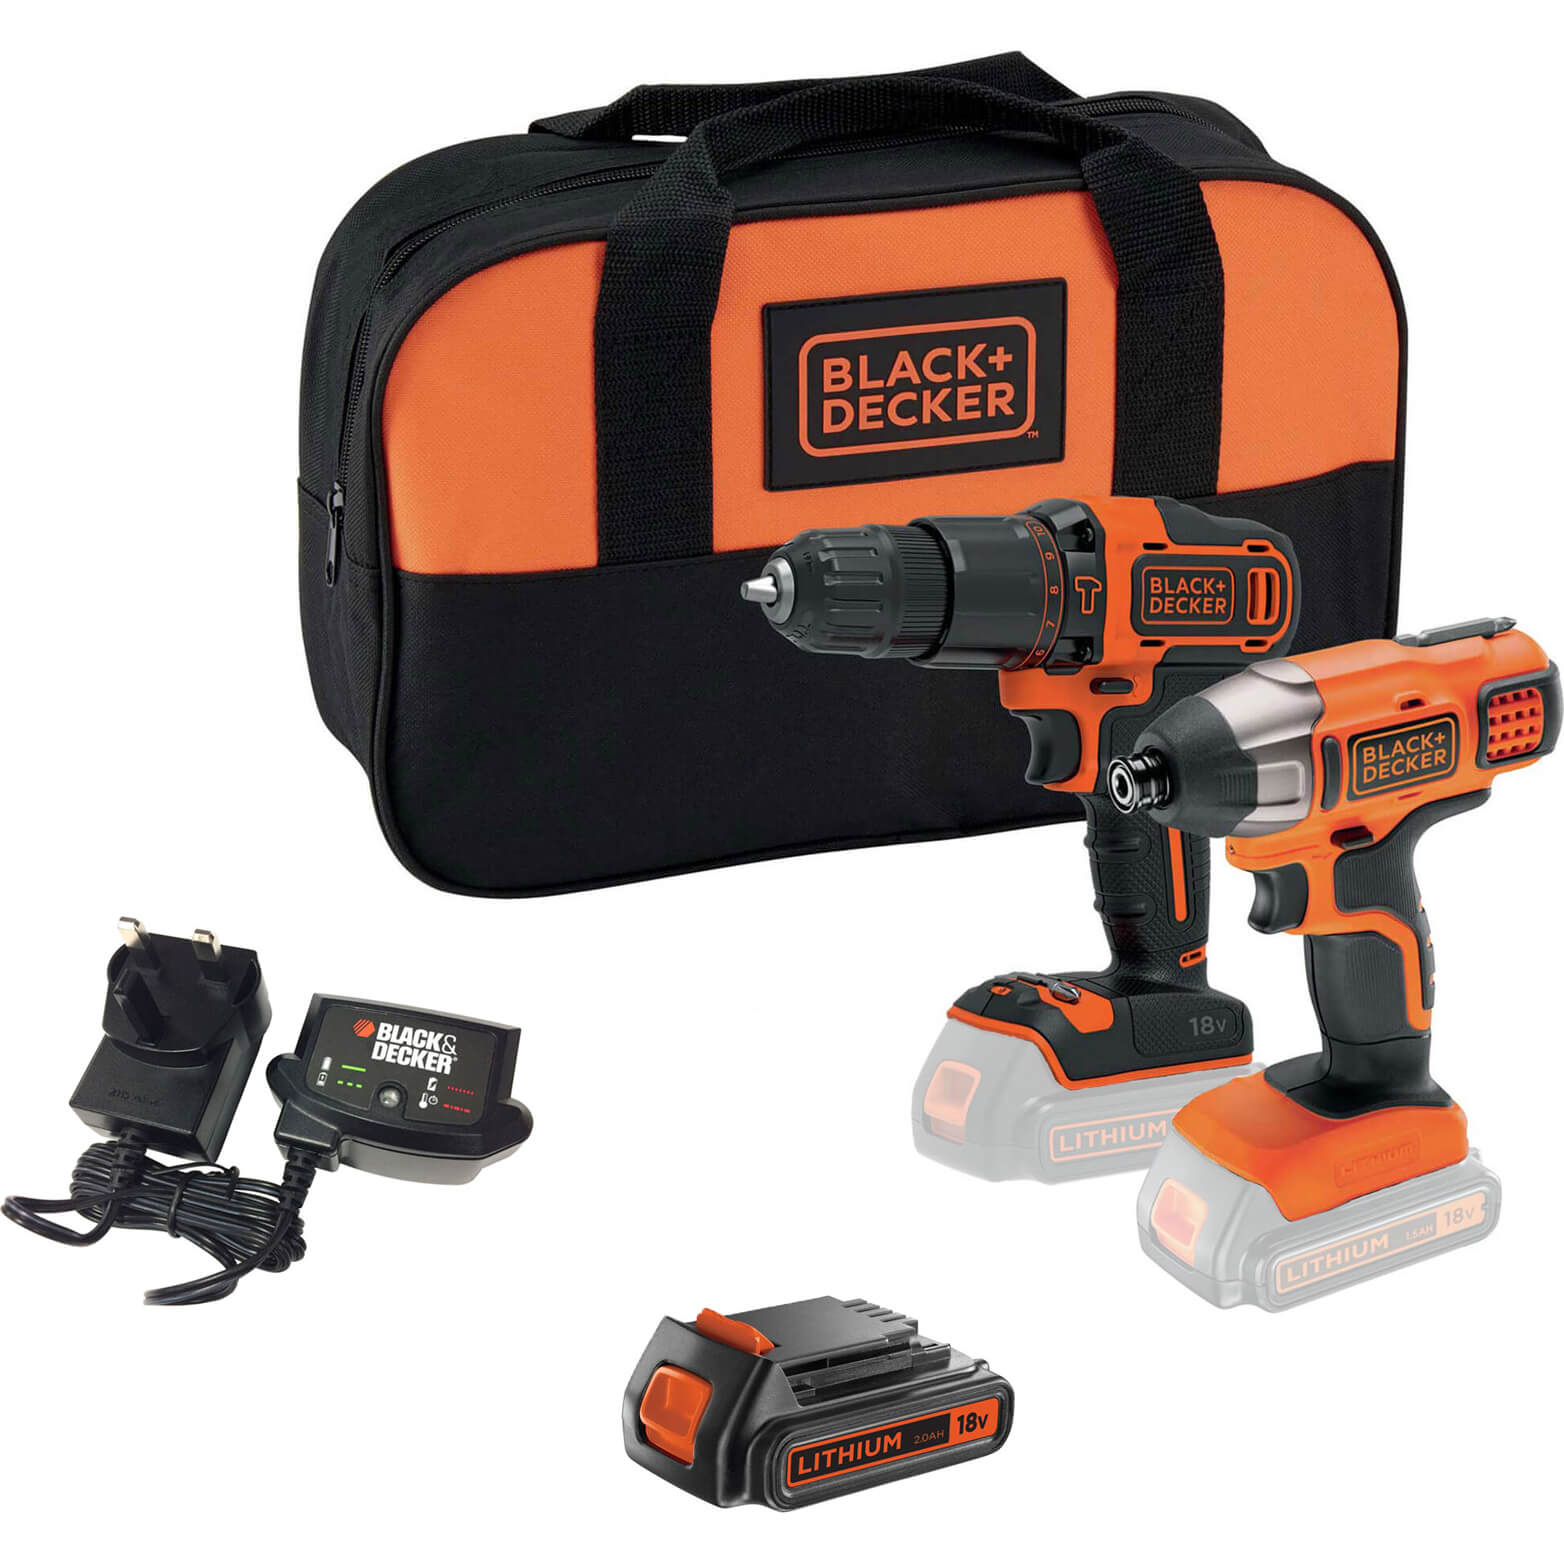 Image of Black and Decker BCK25S2S 18v Cordless Combi Drill and Impact Driver Kit 1 x 2ah Li-ion Charger Bag